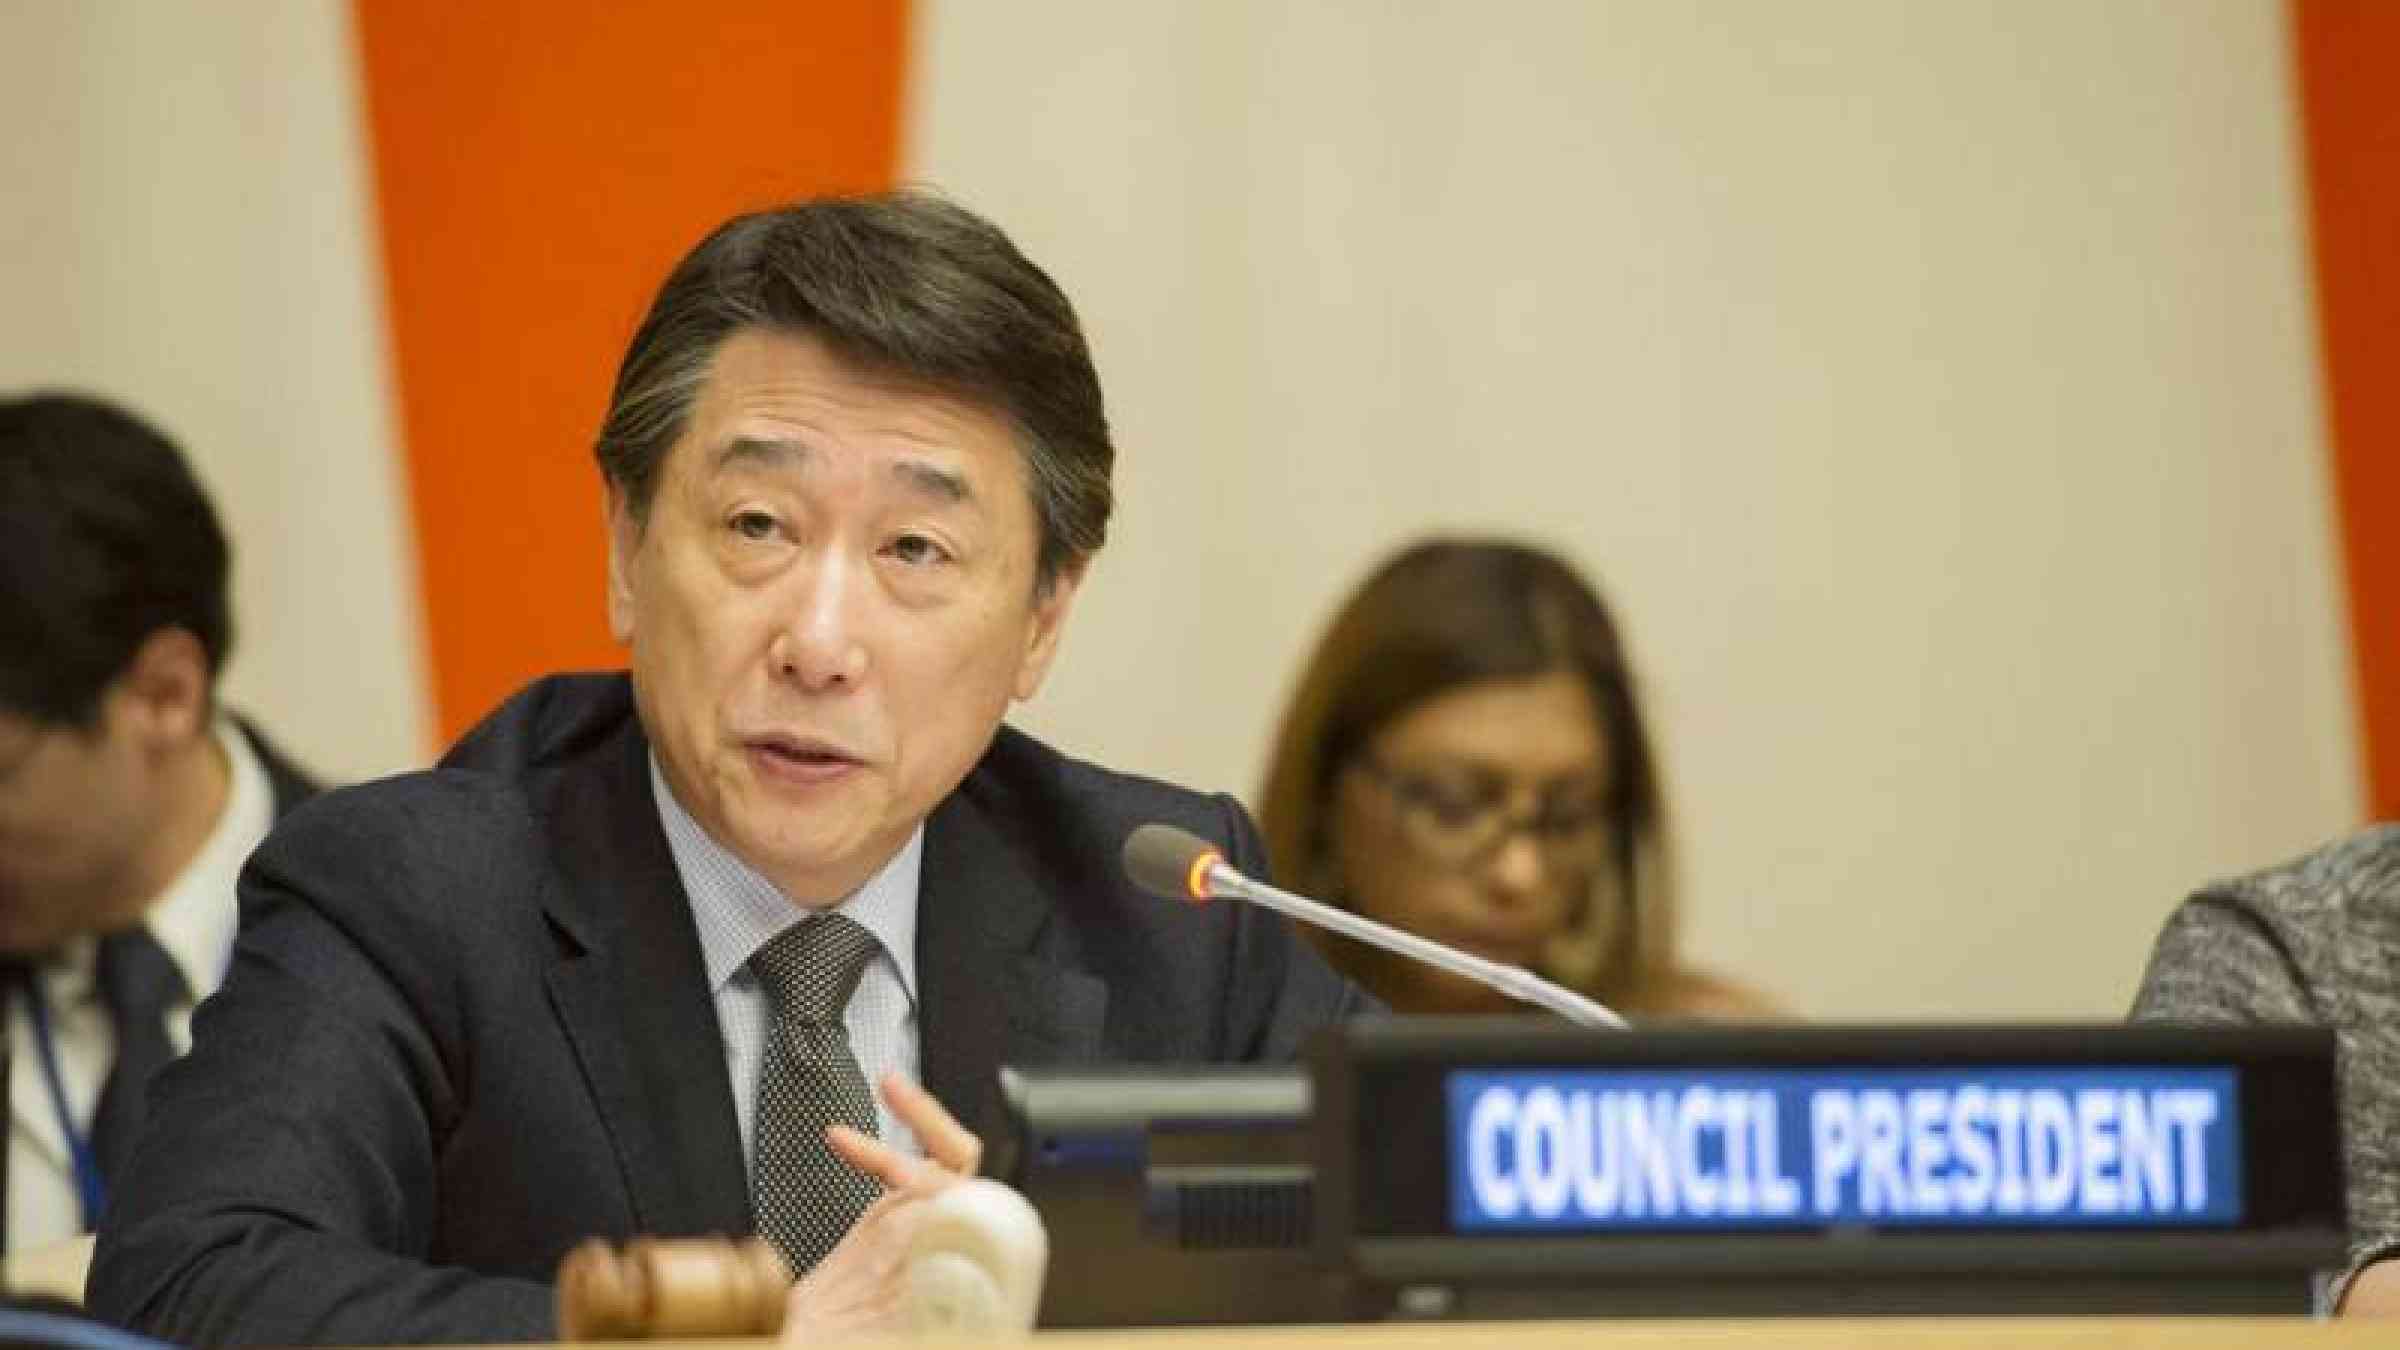 ECOSOC President, Mr. Oh Joon, speaking at the special meeting on the impact of El Niño